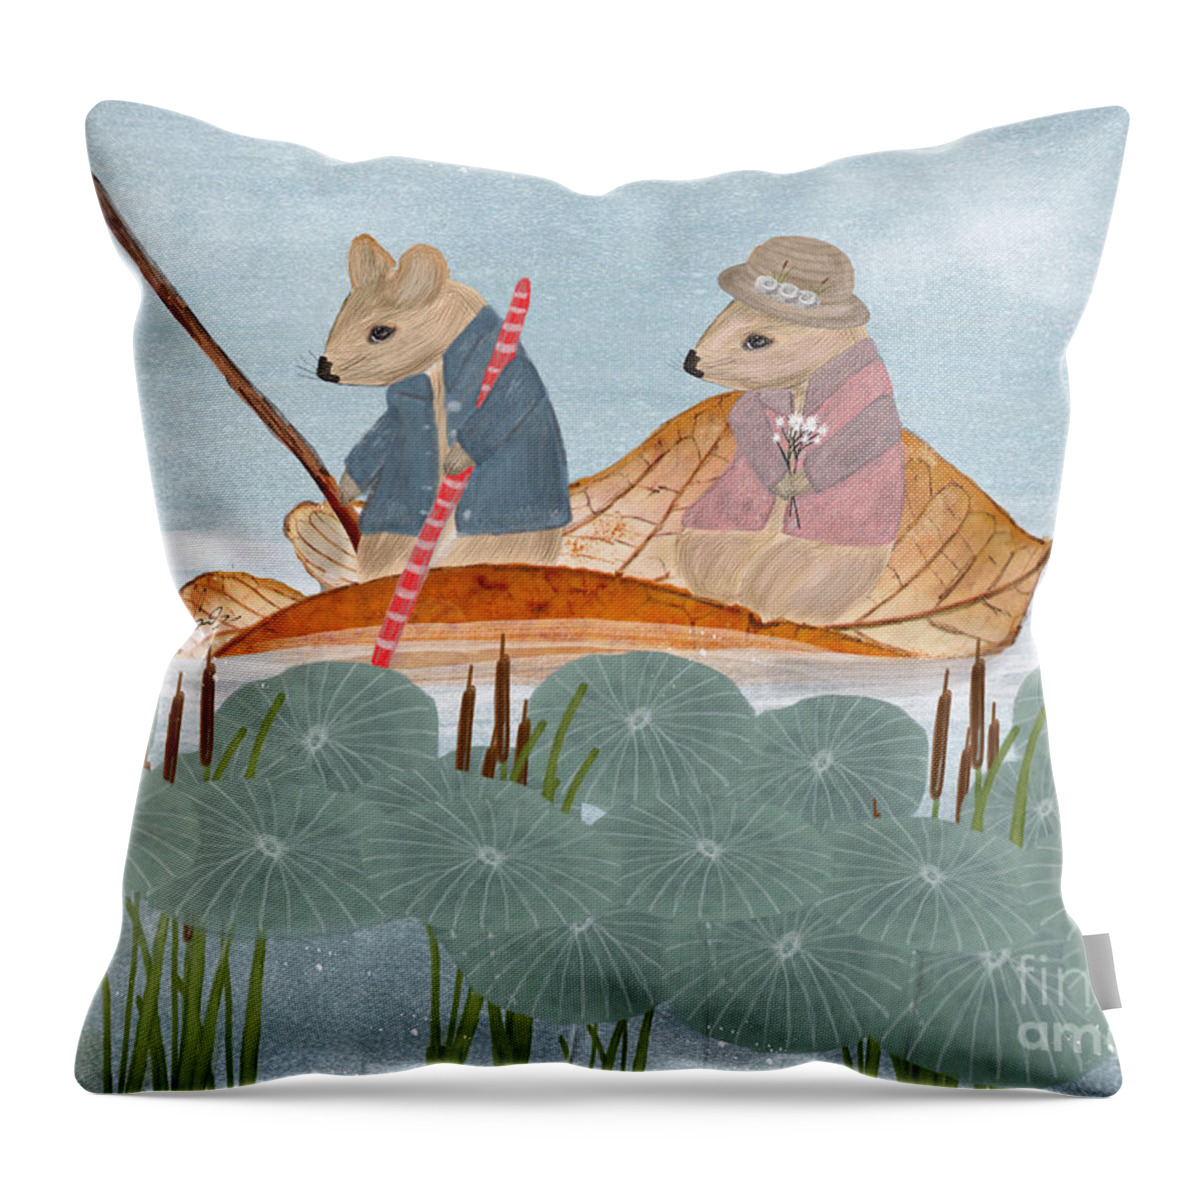 Mississippi Throw Pillow featuring the painting Mississippi Mice by Bri Buckley